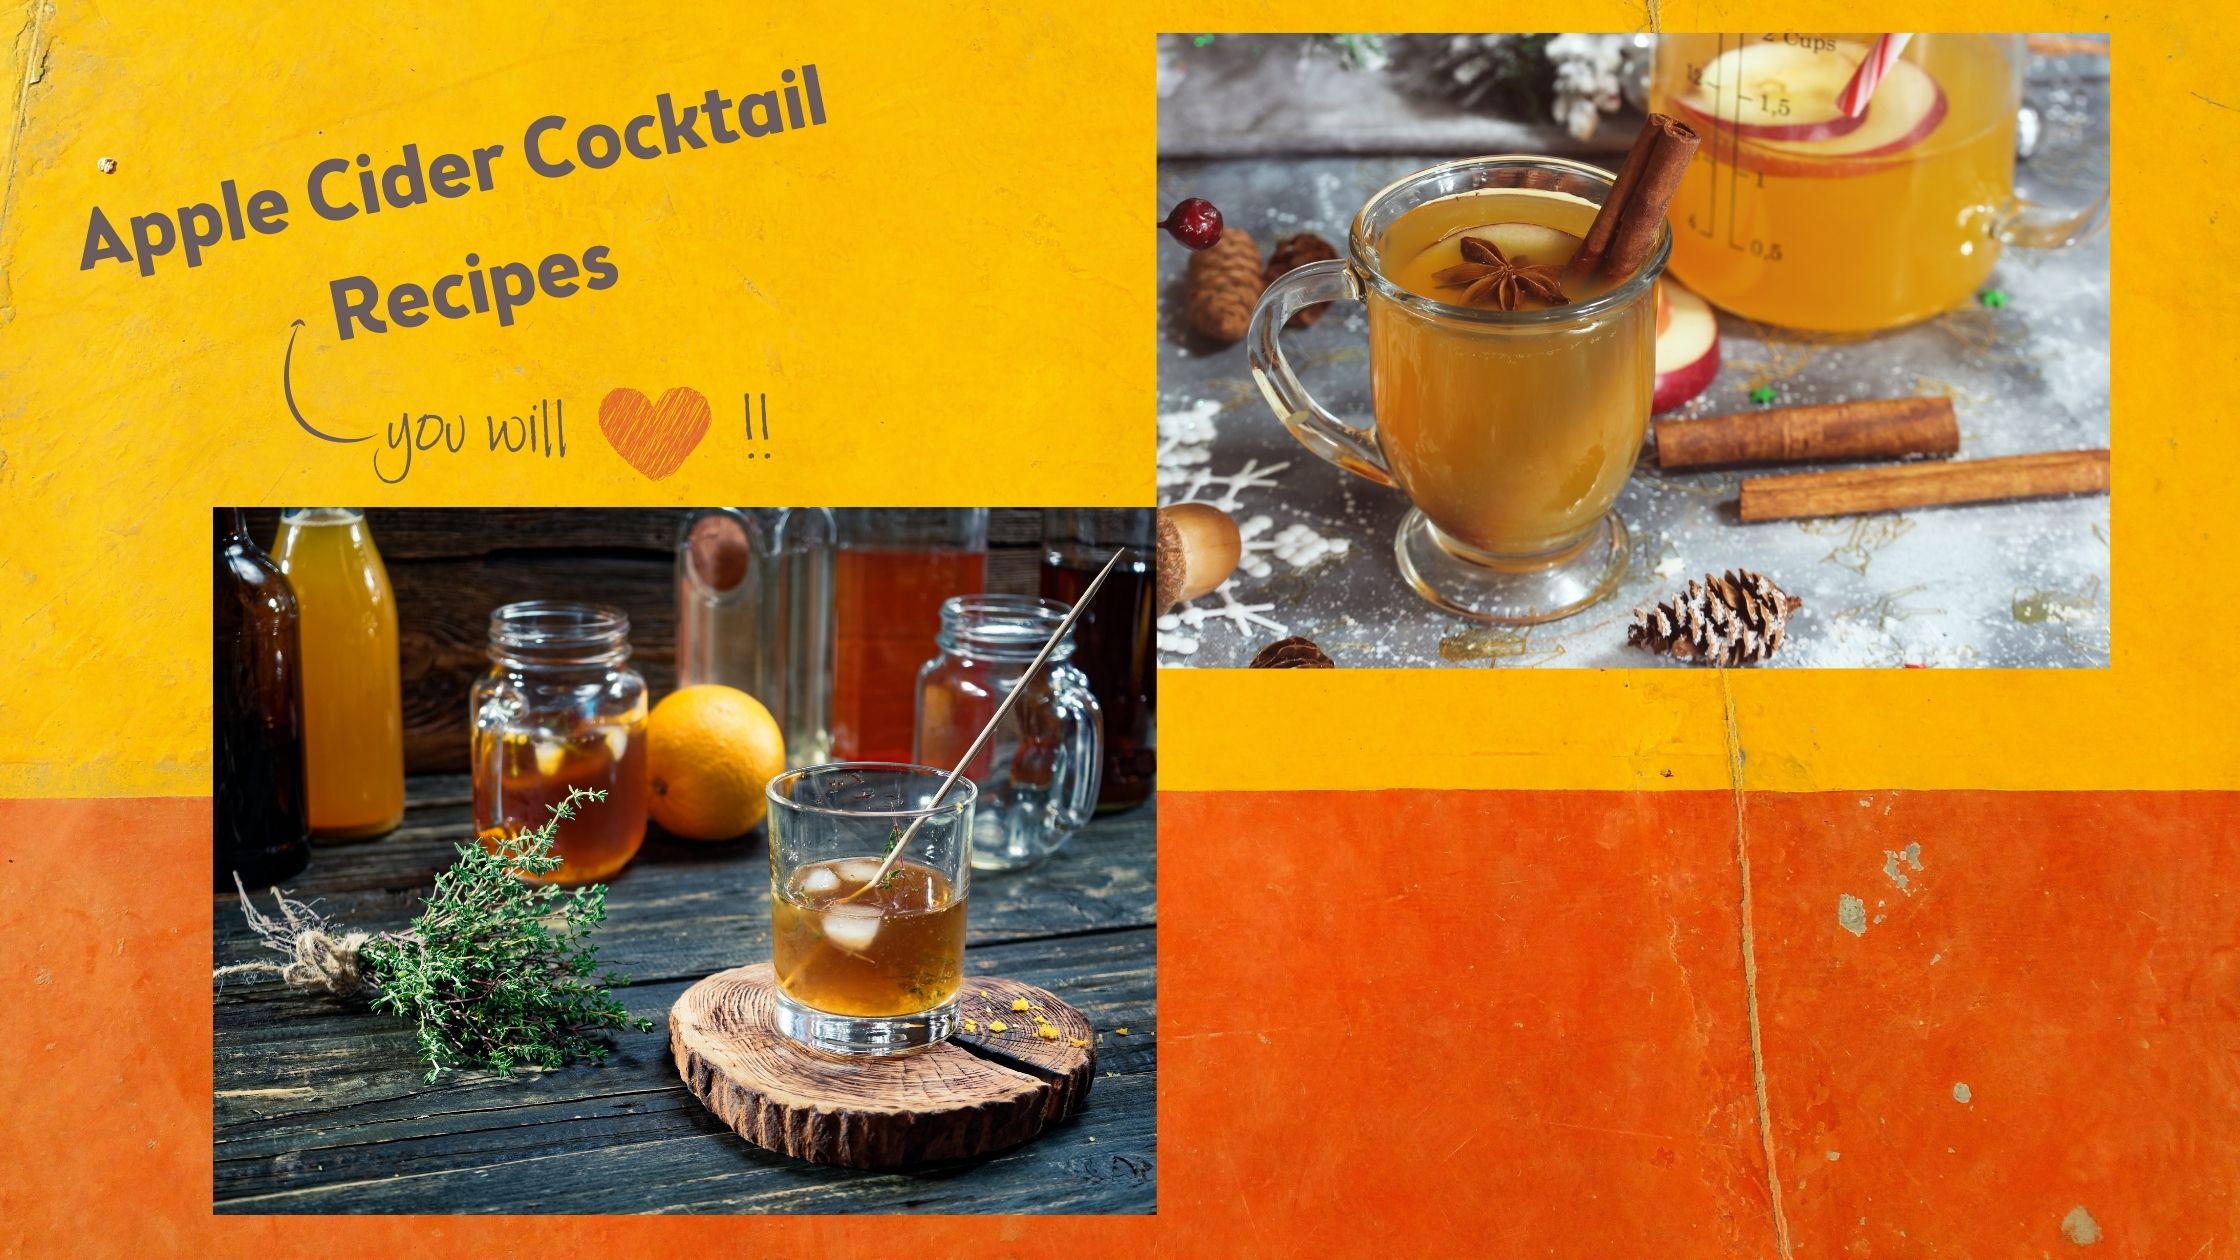 Cheers to Four Apple Cider Cocktails You Will LOVE!!